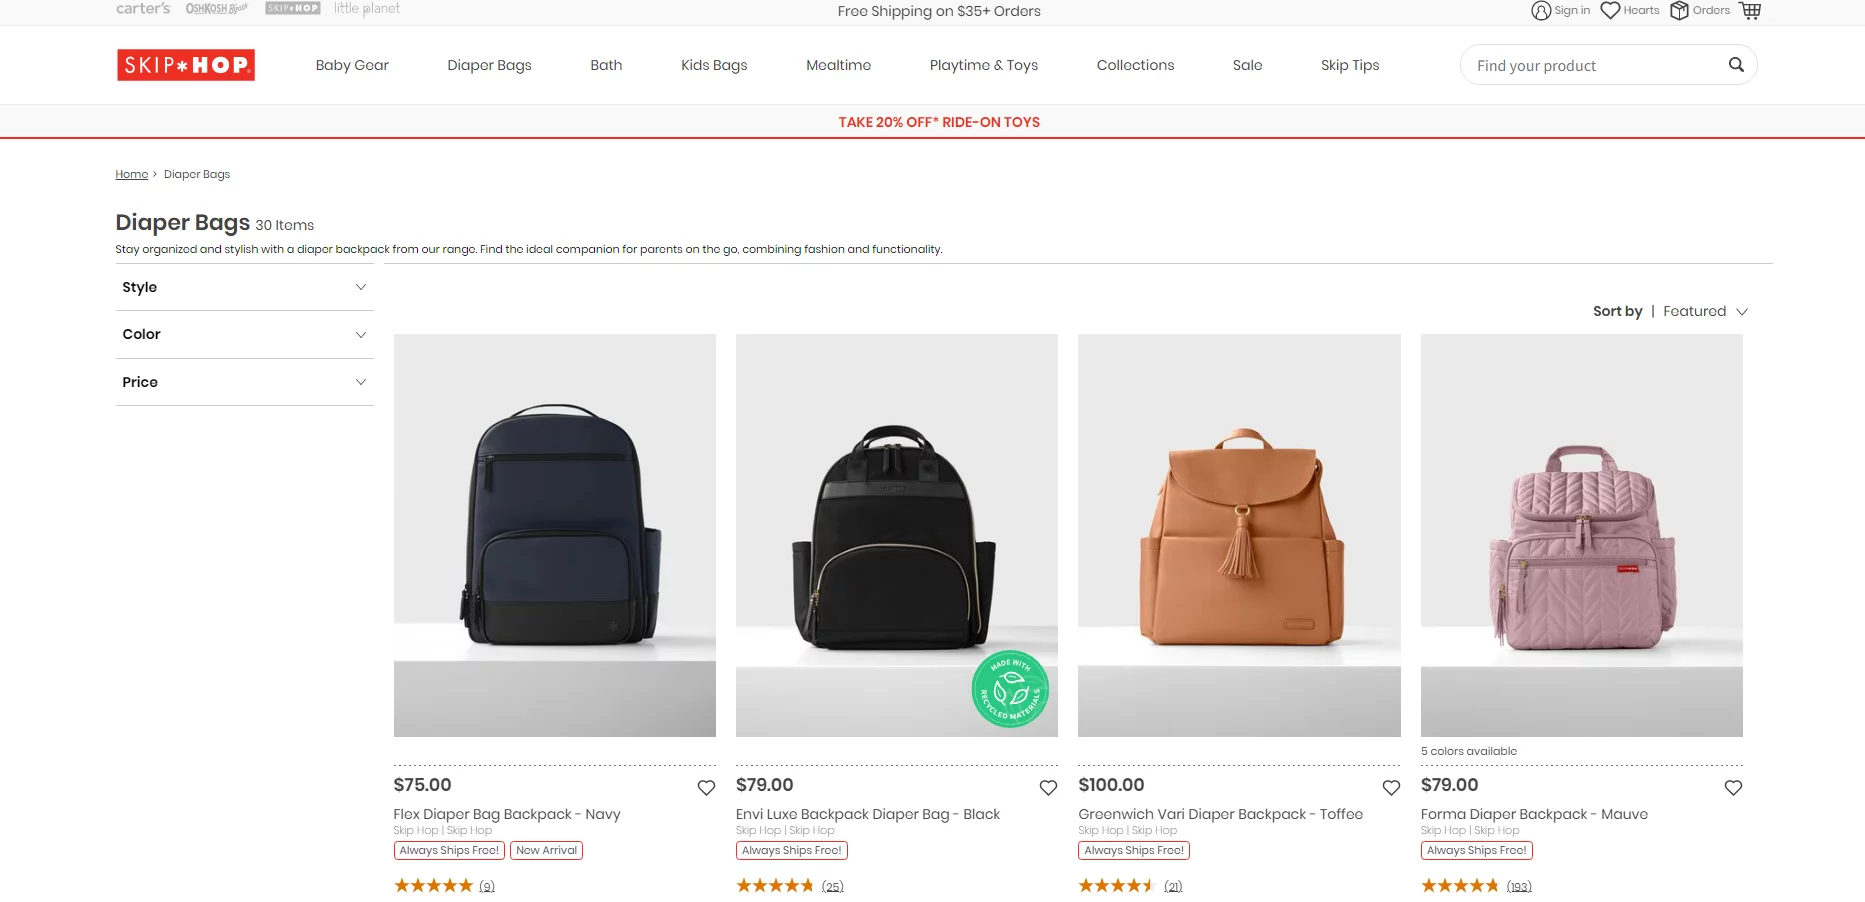 Trends and analysis of the Diaper Bags market